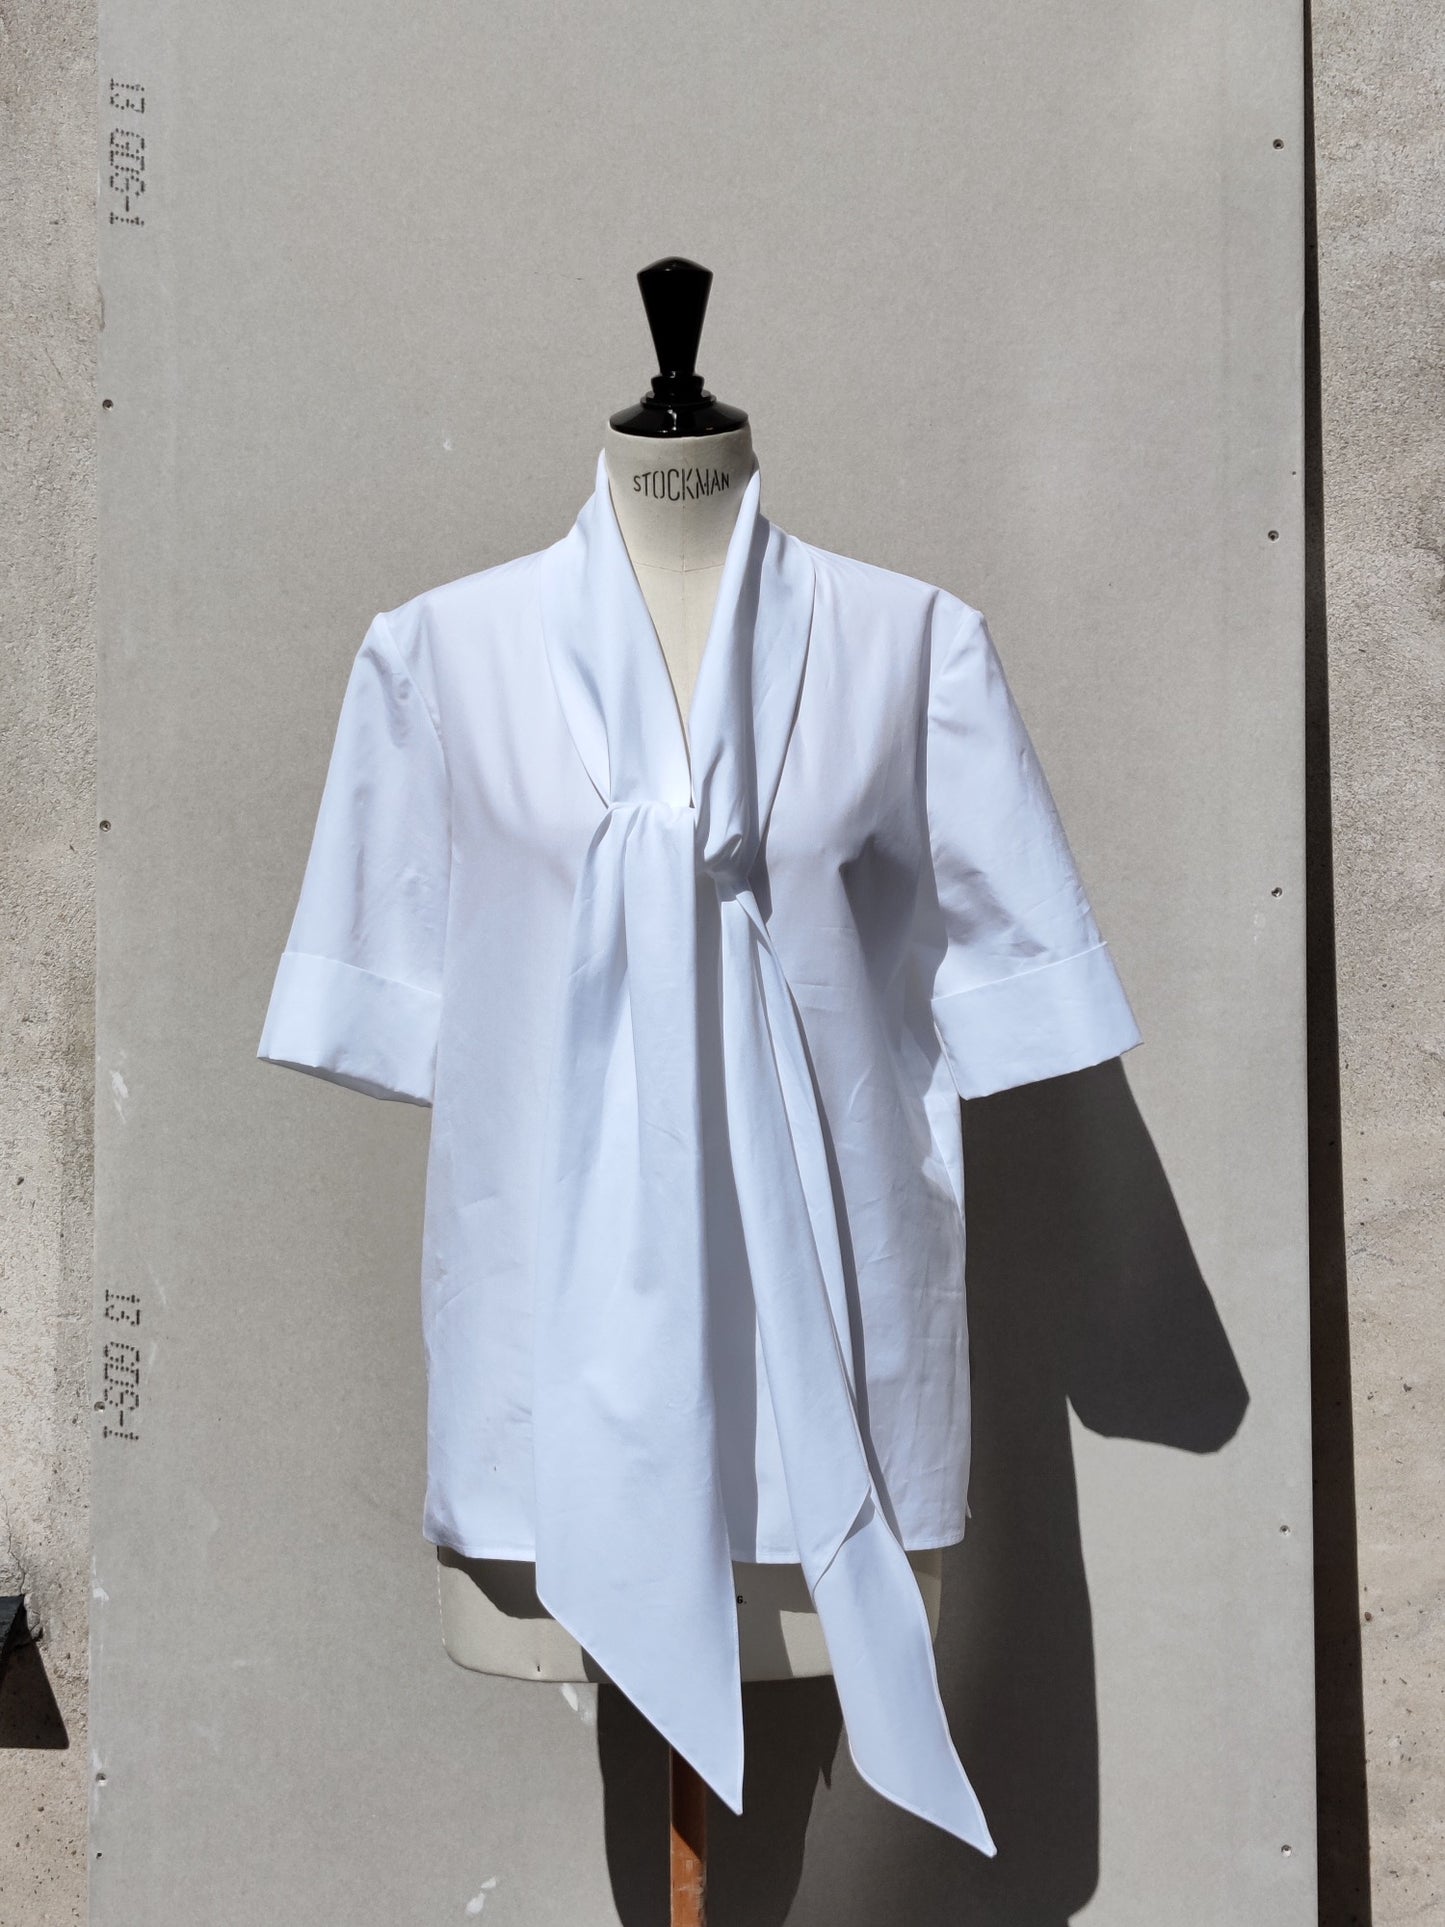 Front view. Alan shirt (white) has a V-shaped neckline incorporating a long ties which can be tied in a knot or a bow or just left.